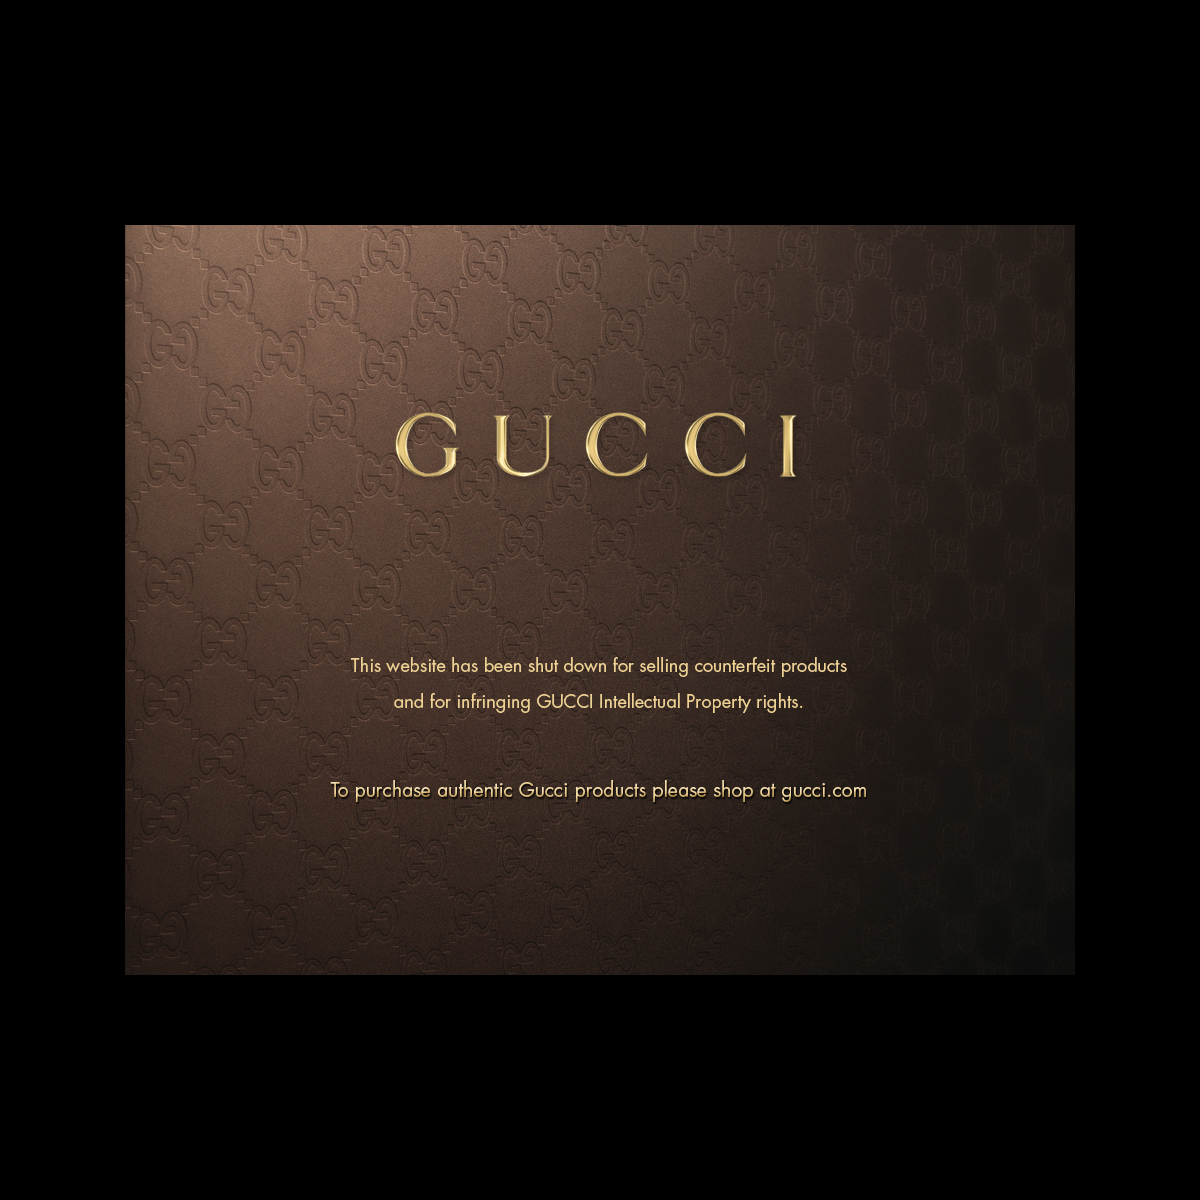 A complete backup of gucci.net.co